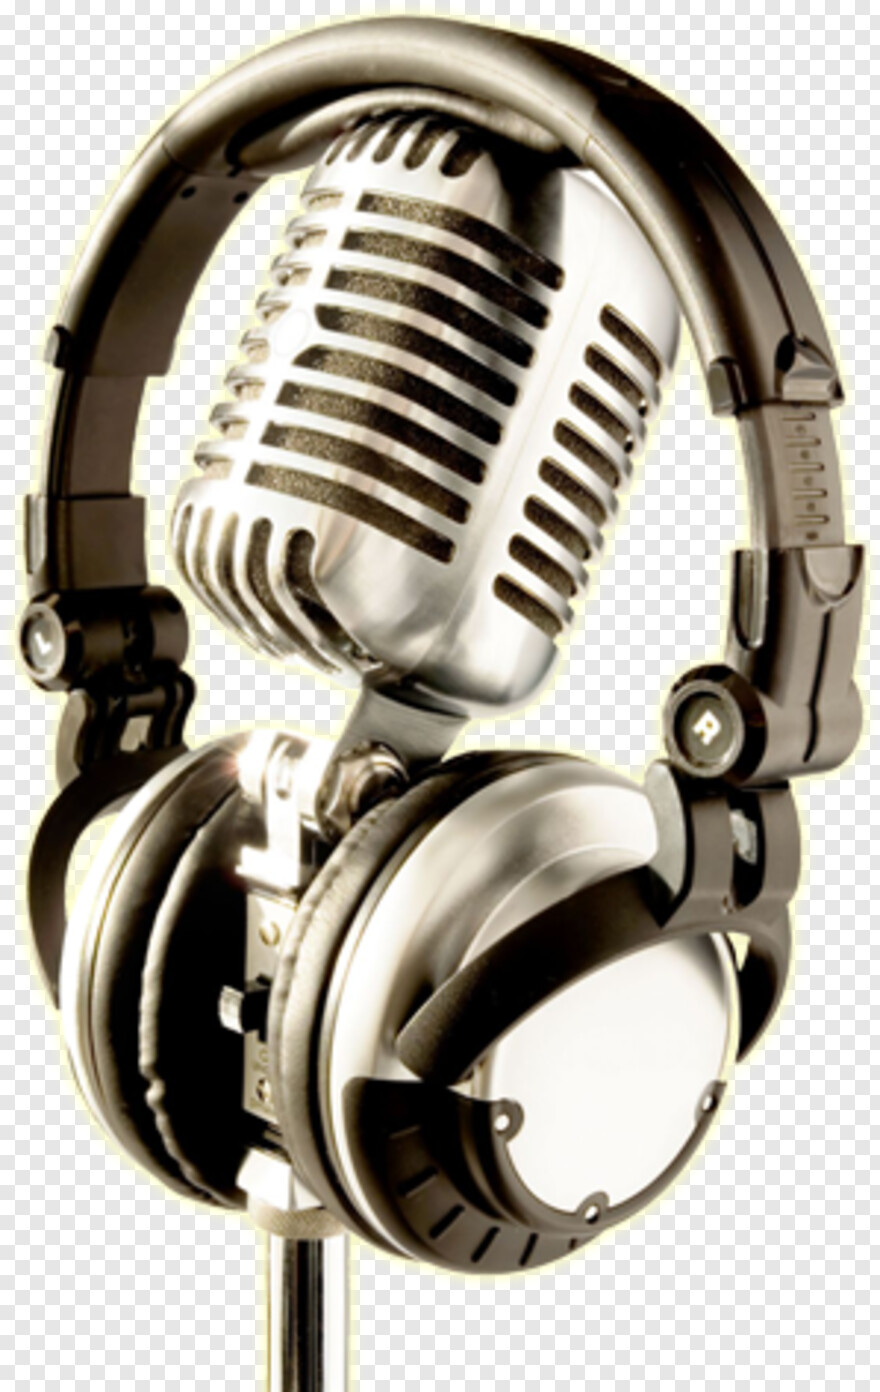 microphone-icon # 769564